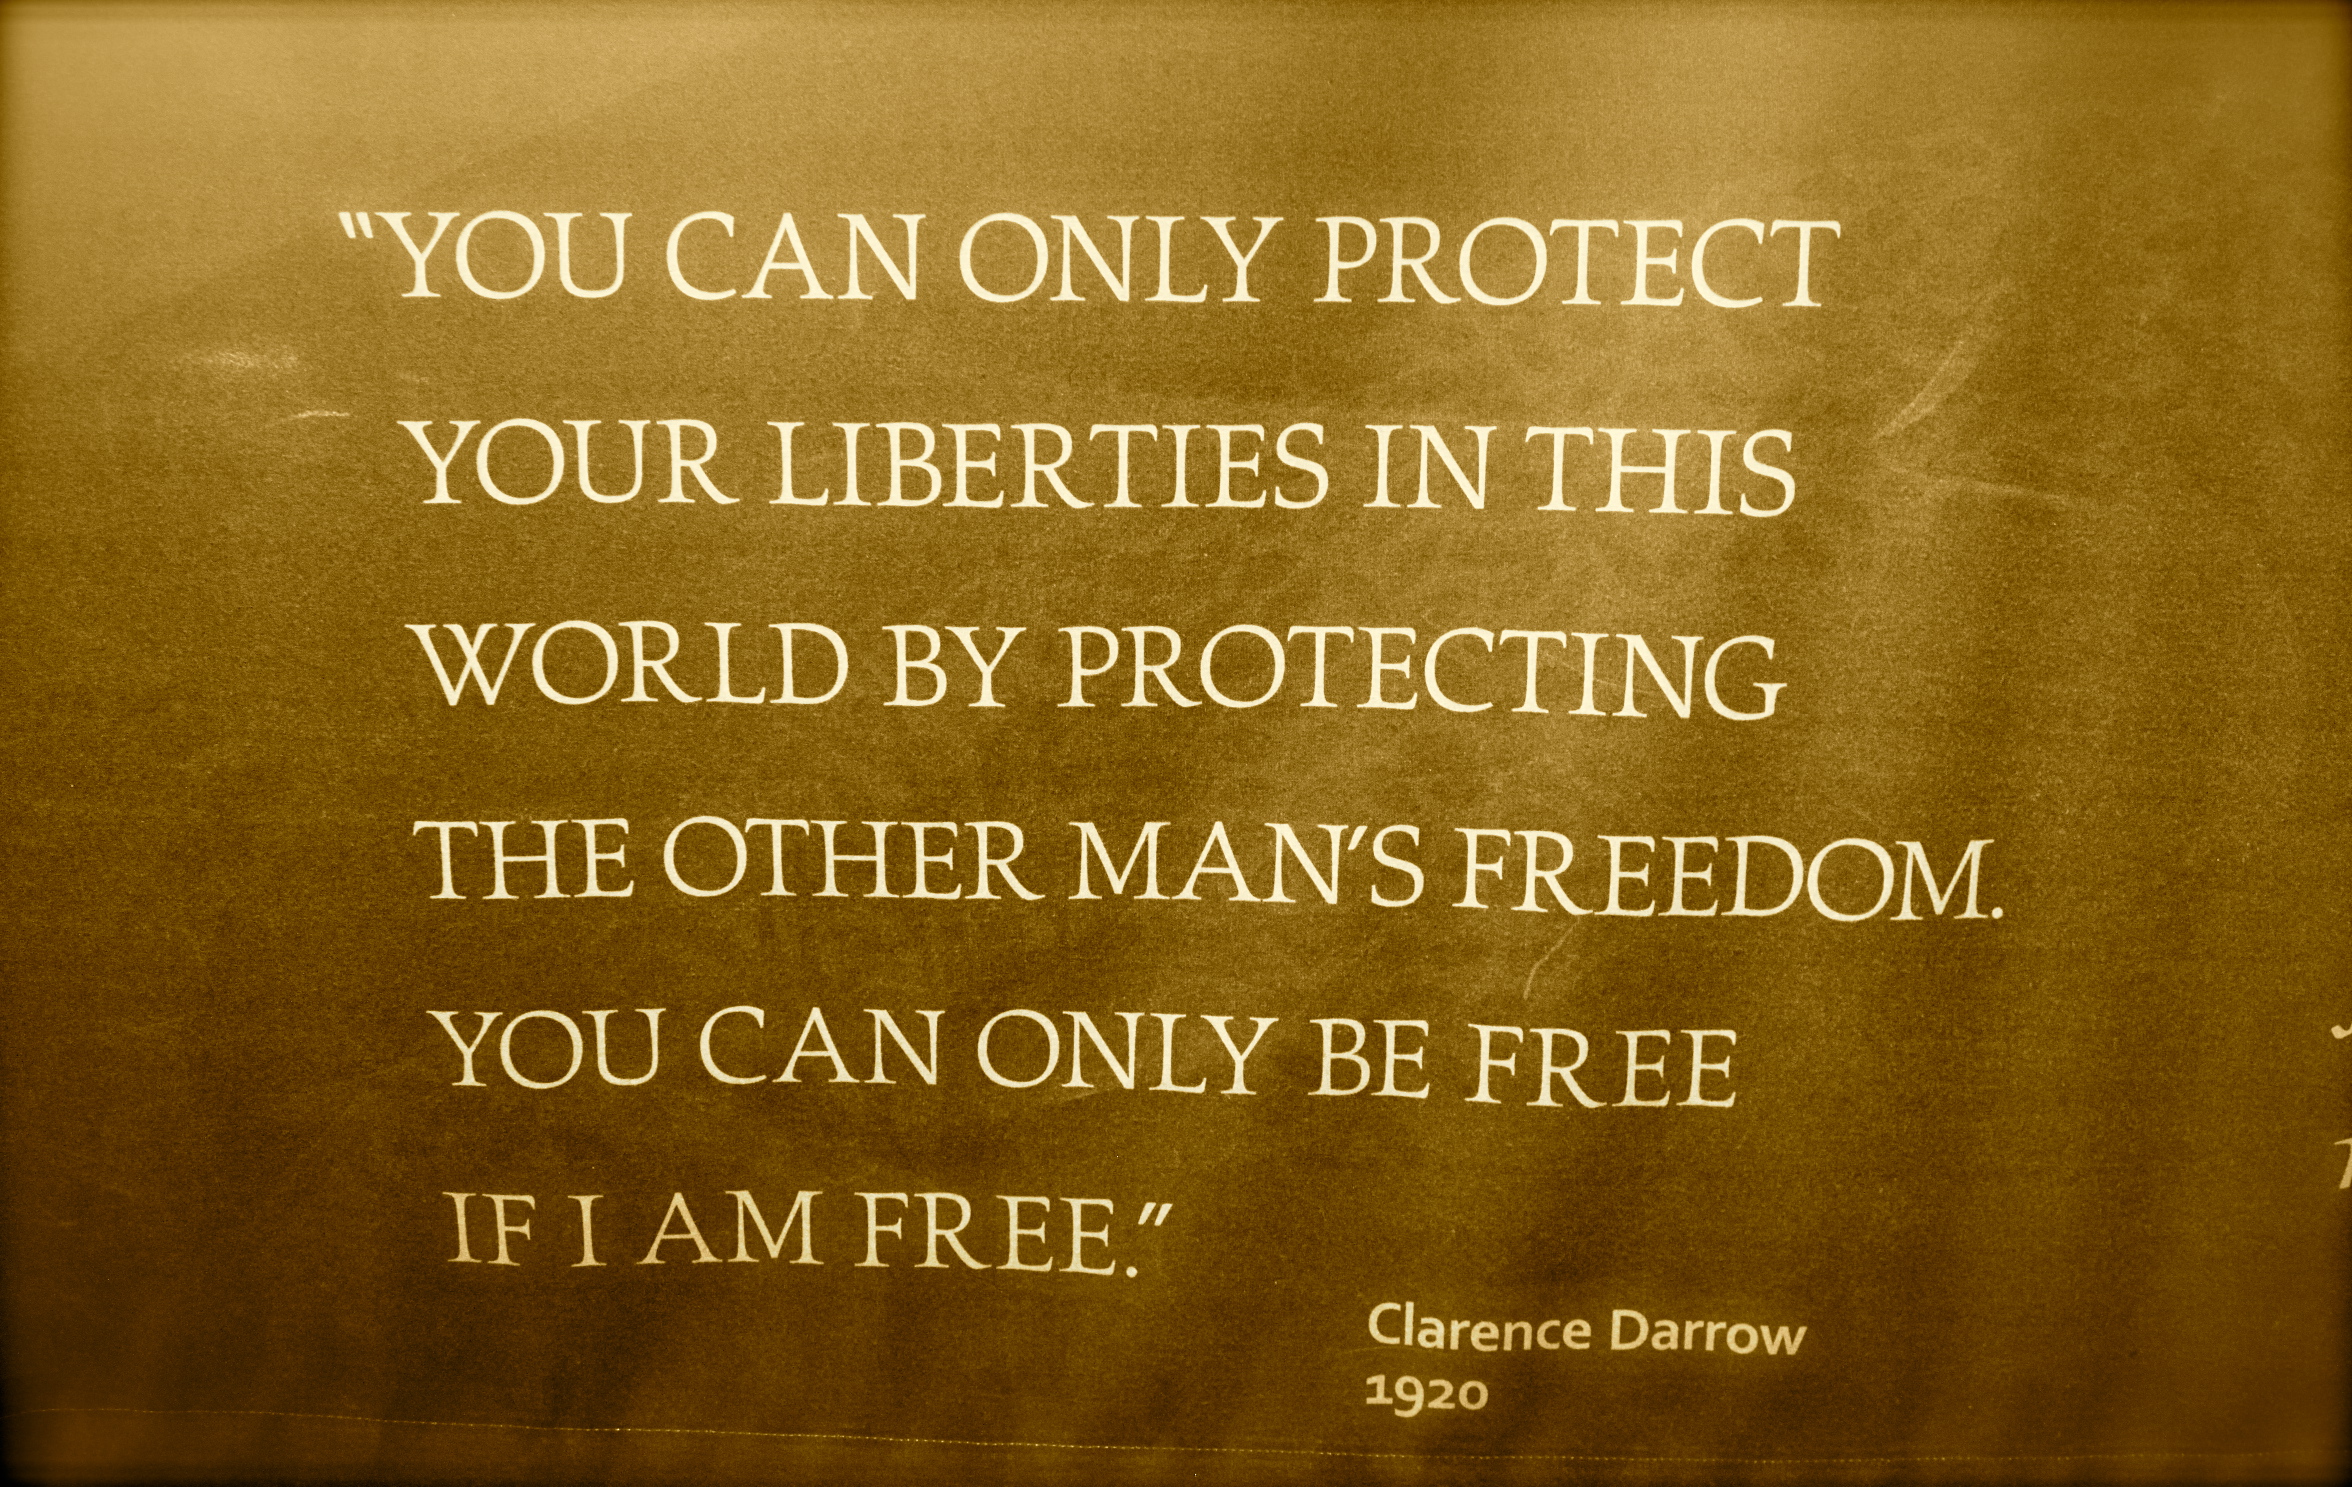 This Clarence Darrow quote from the visitor center stuck with me.  So true.